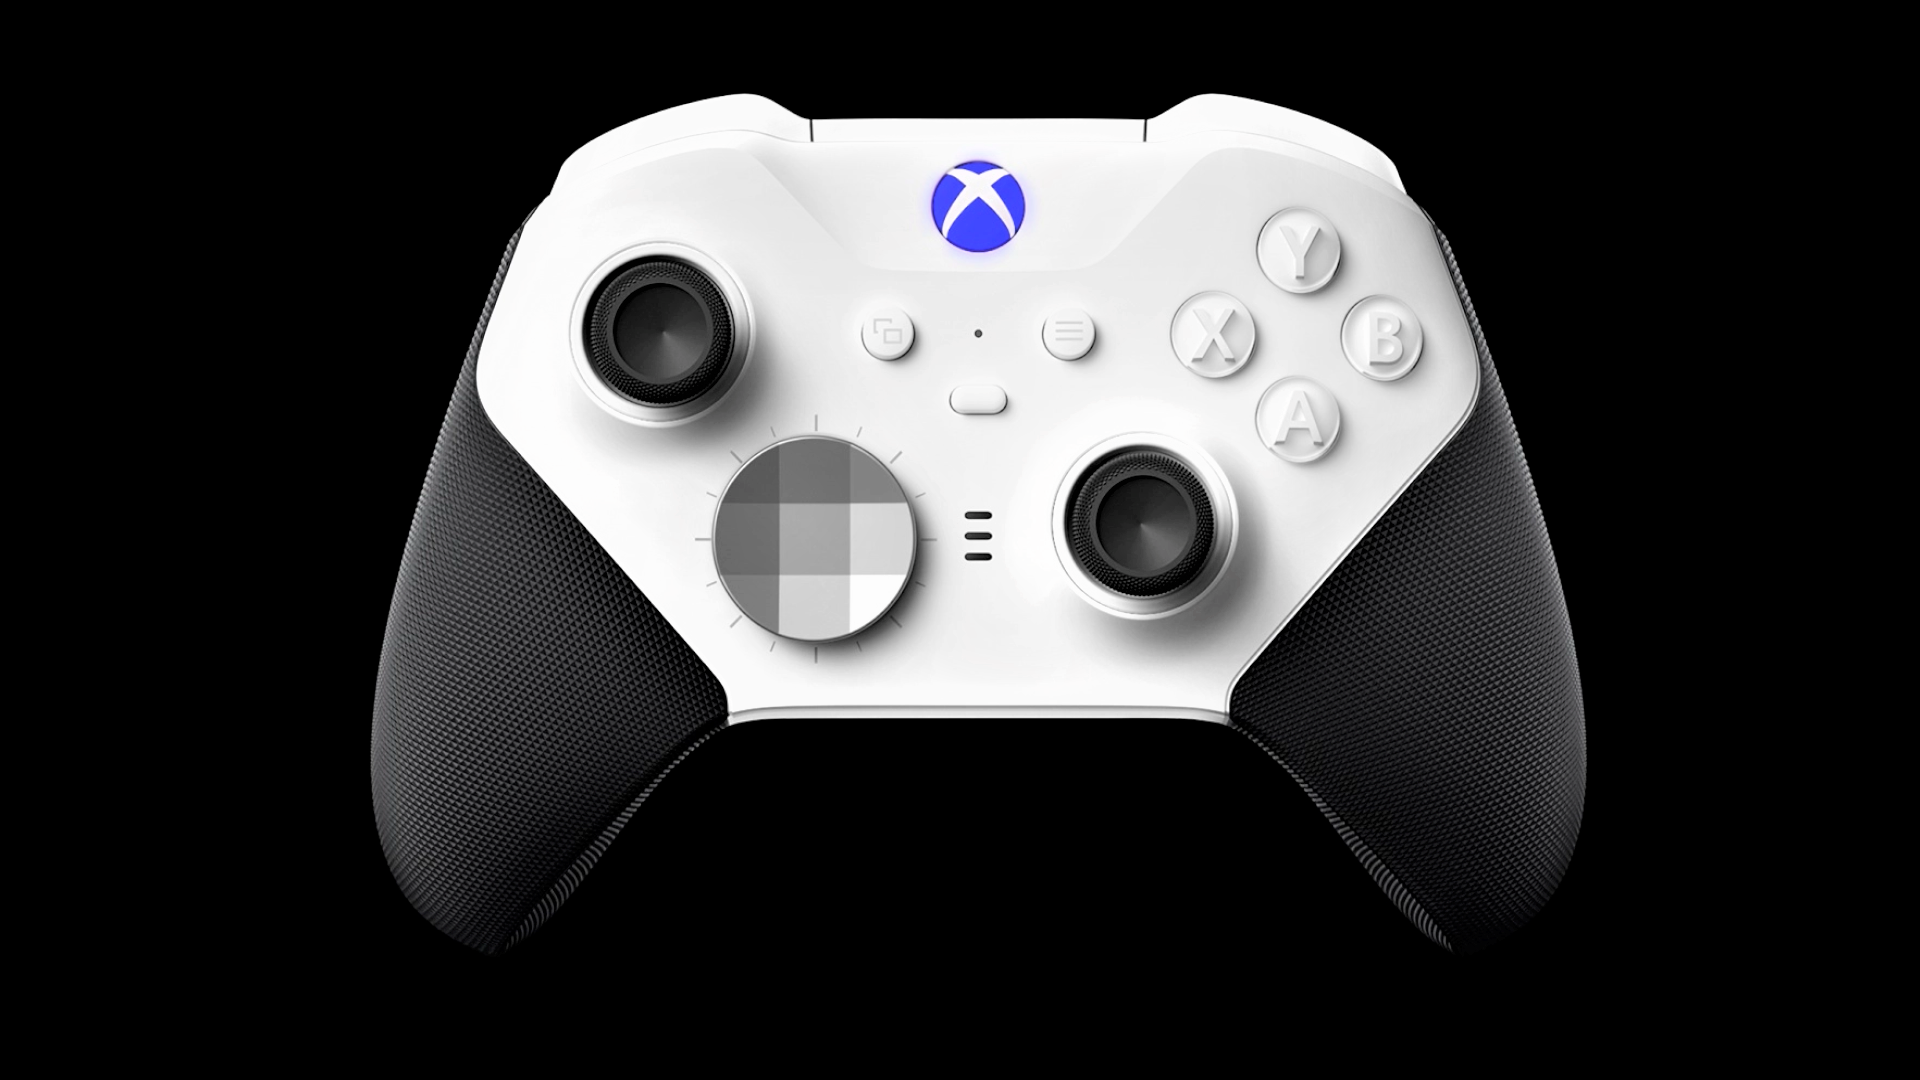 Black and white Xbox Elite Series 2 controller on black background showcasing the new RGB home button which is purple in this instnace